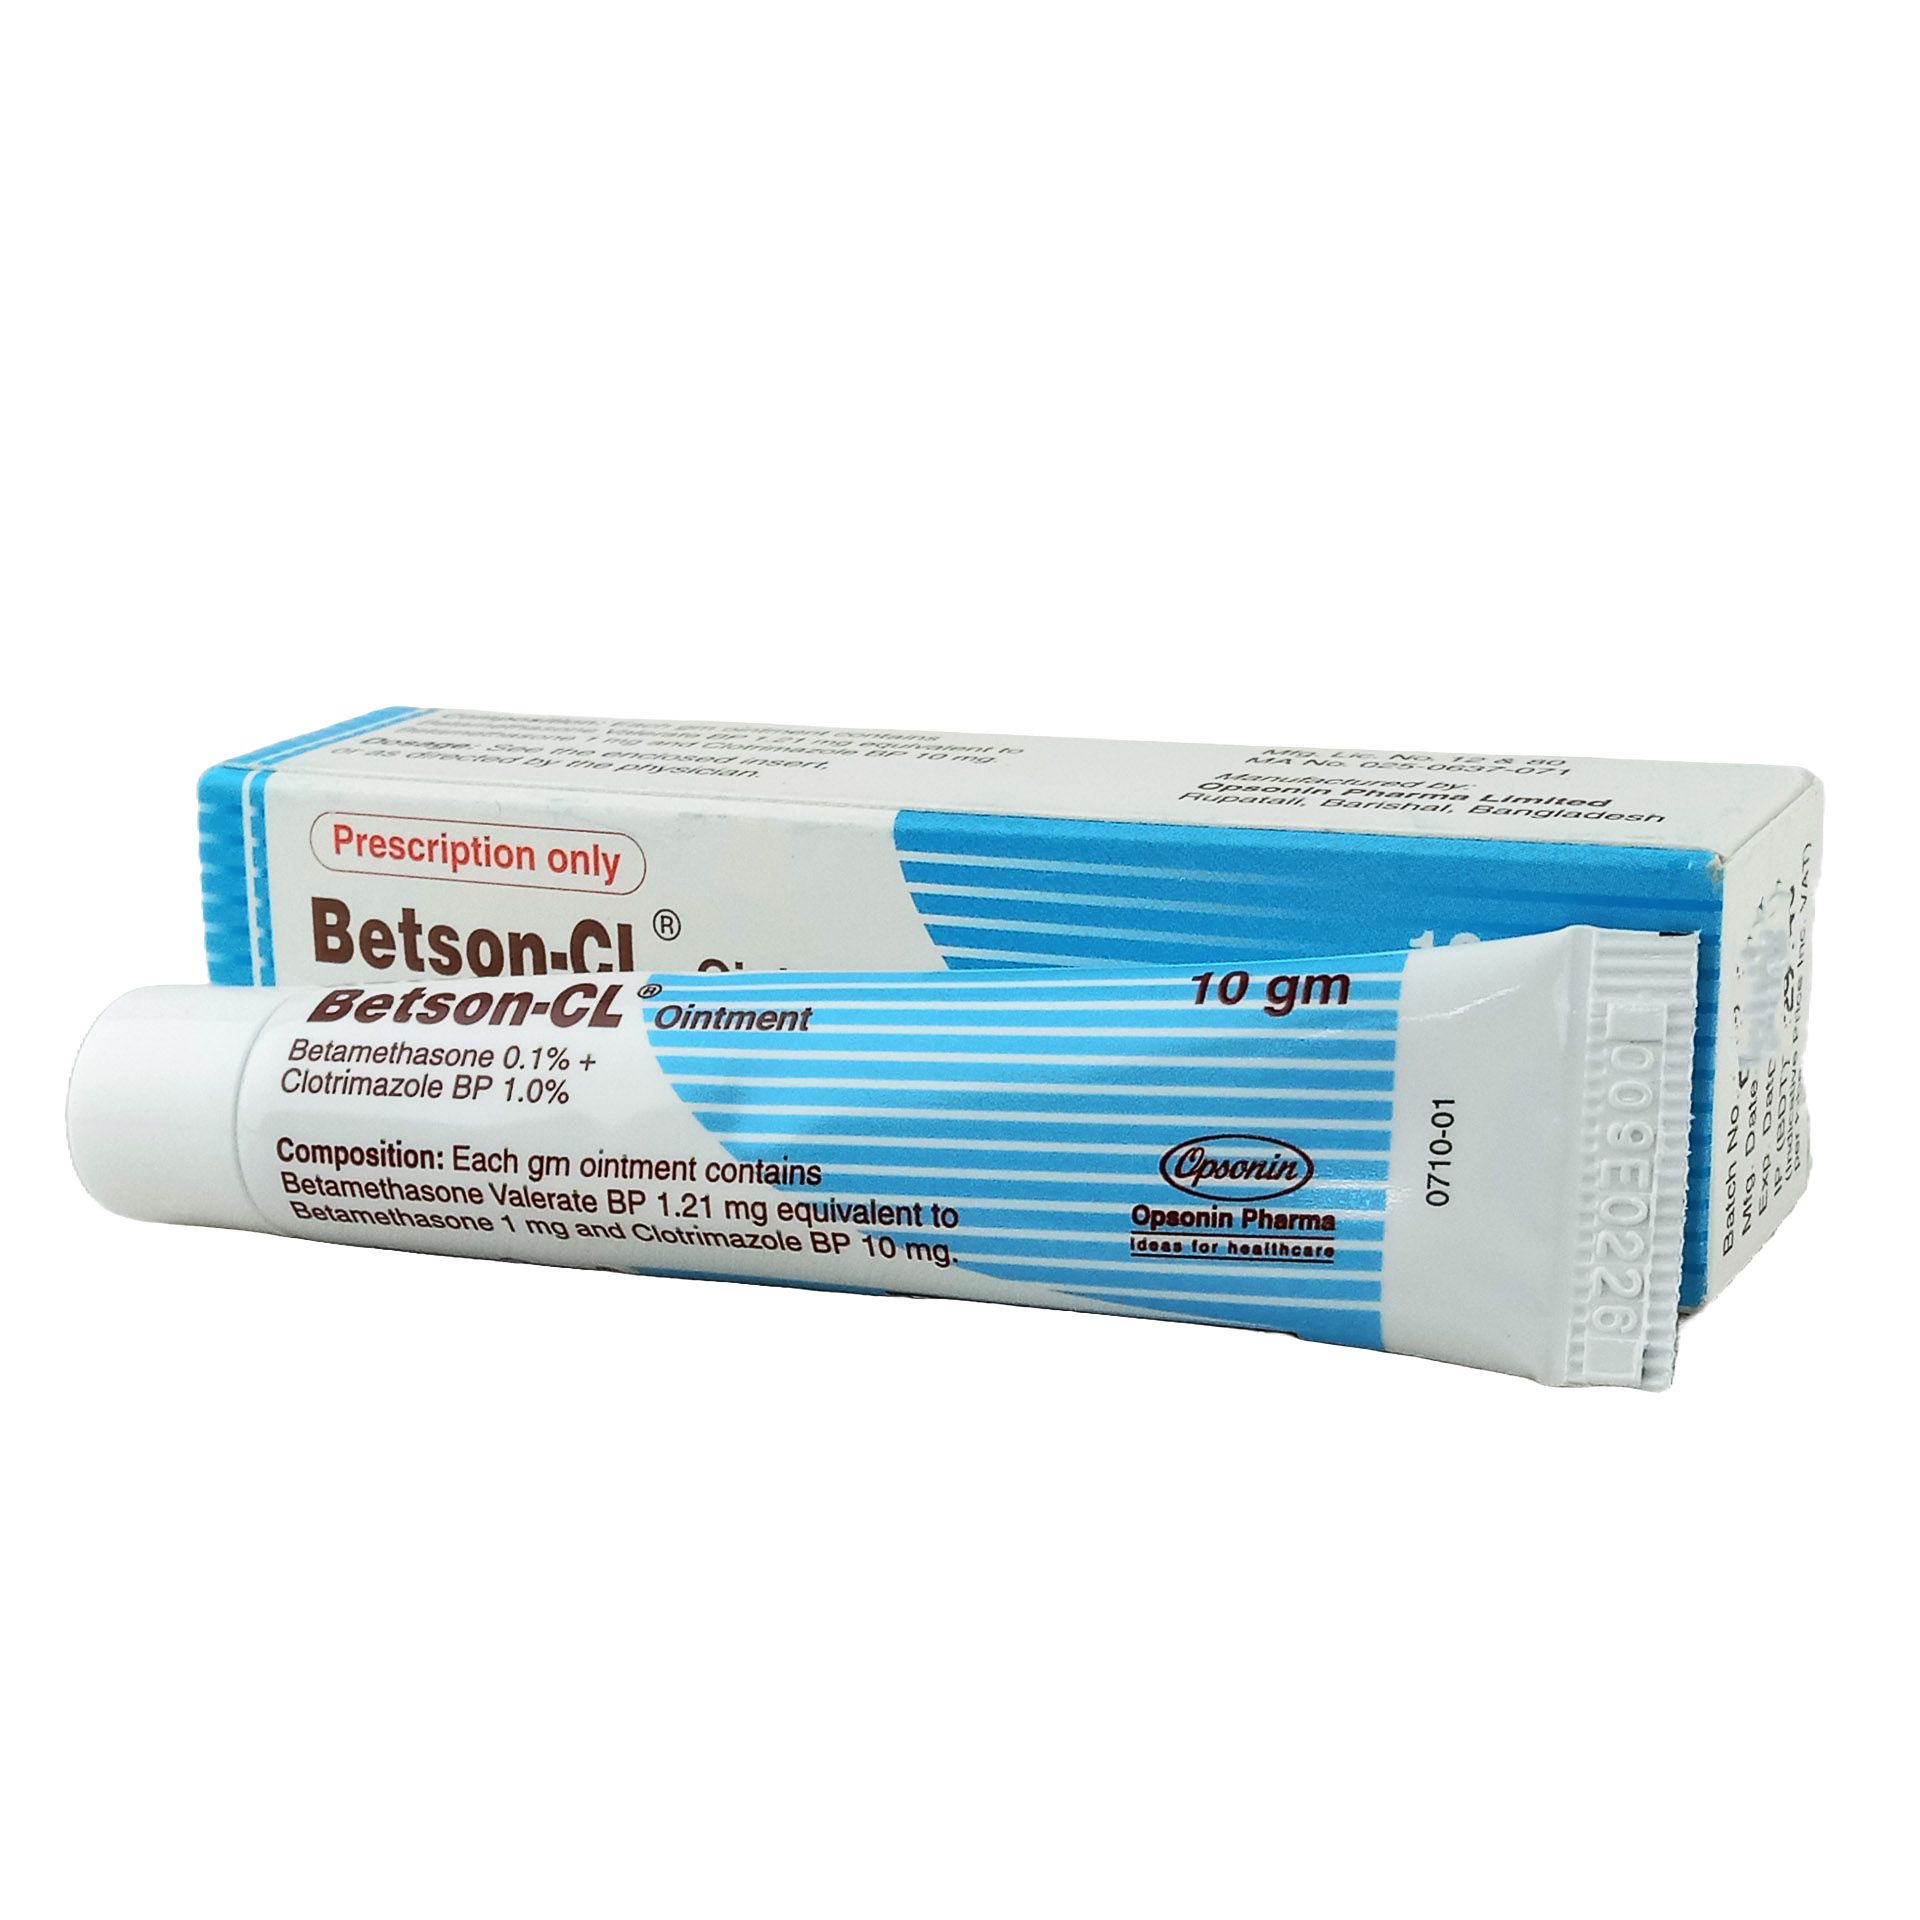 Betson CL 0.1%+1% Ointment